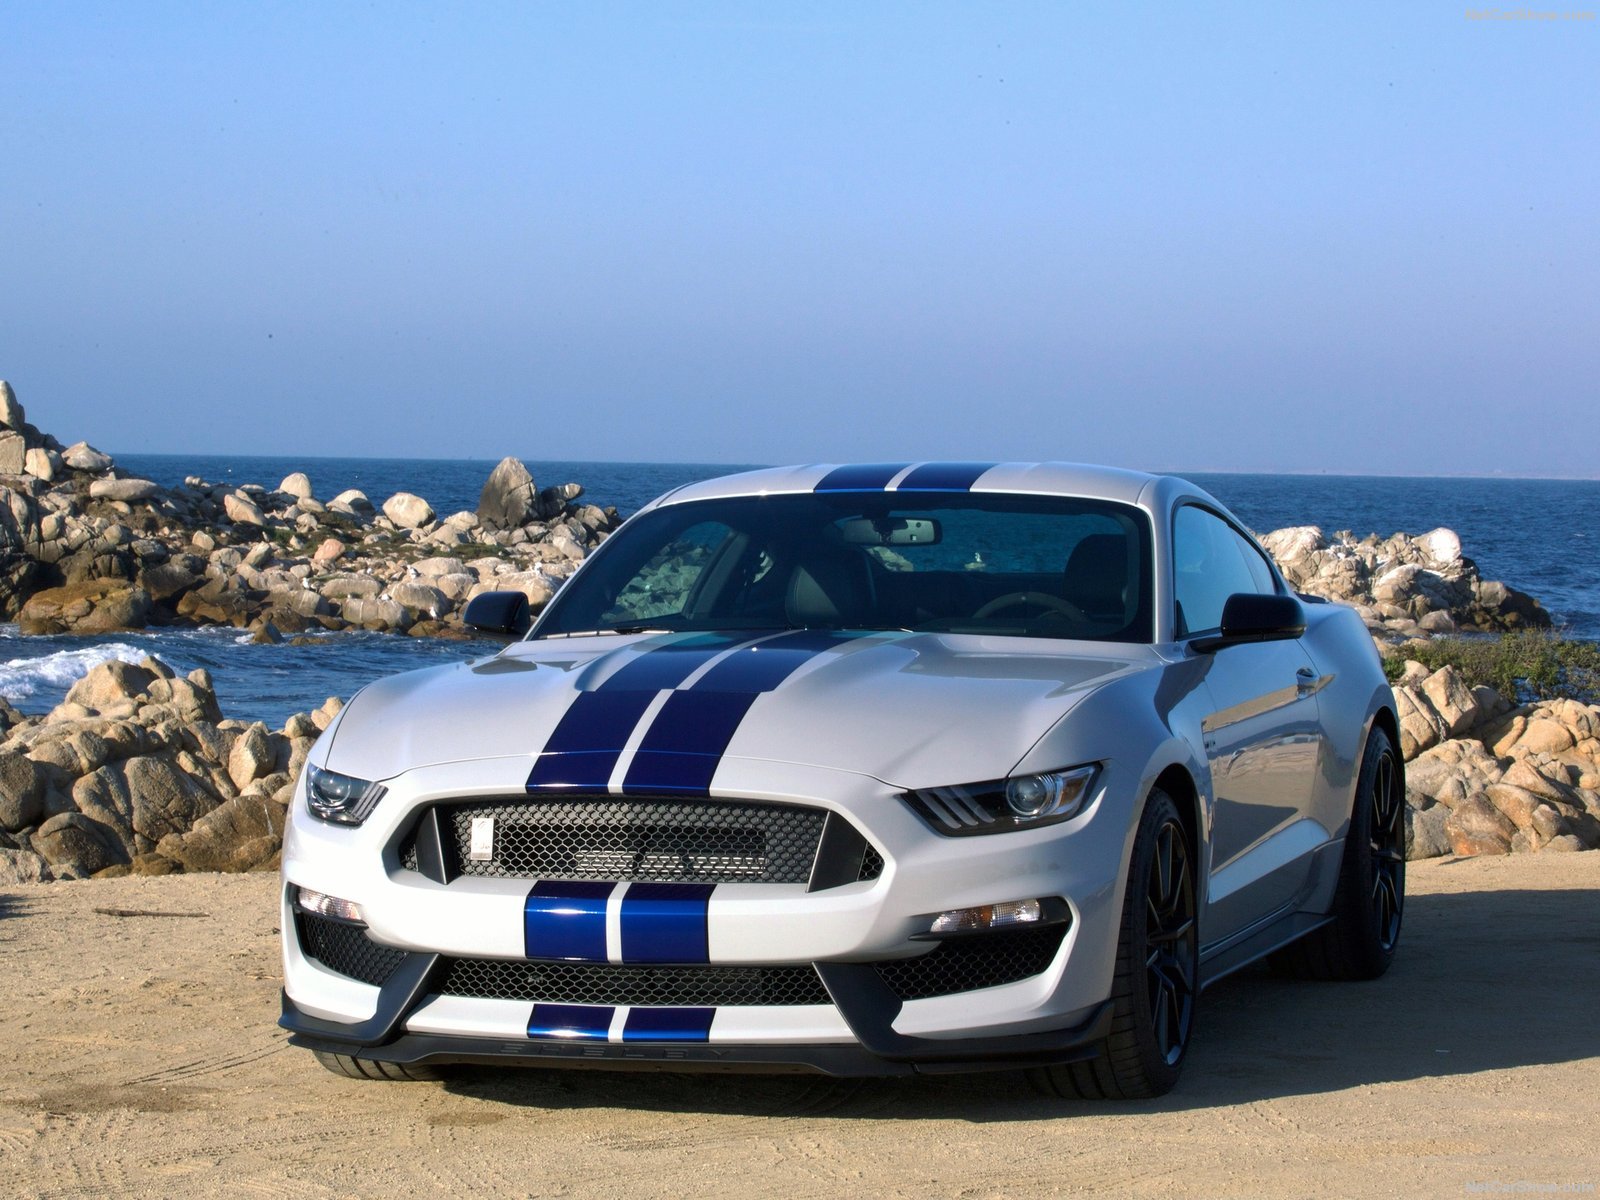 2016, Cars, Ford mustang, Gt350, Motors, Race, Shelby, Speed, Super Wallpaper